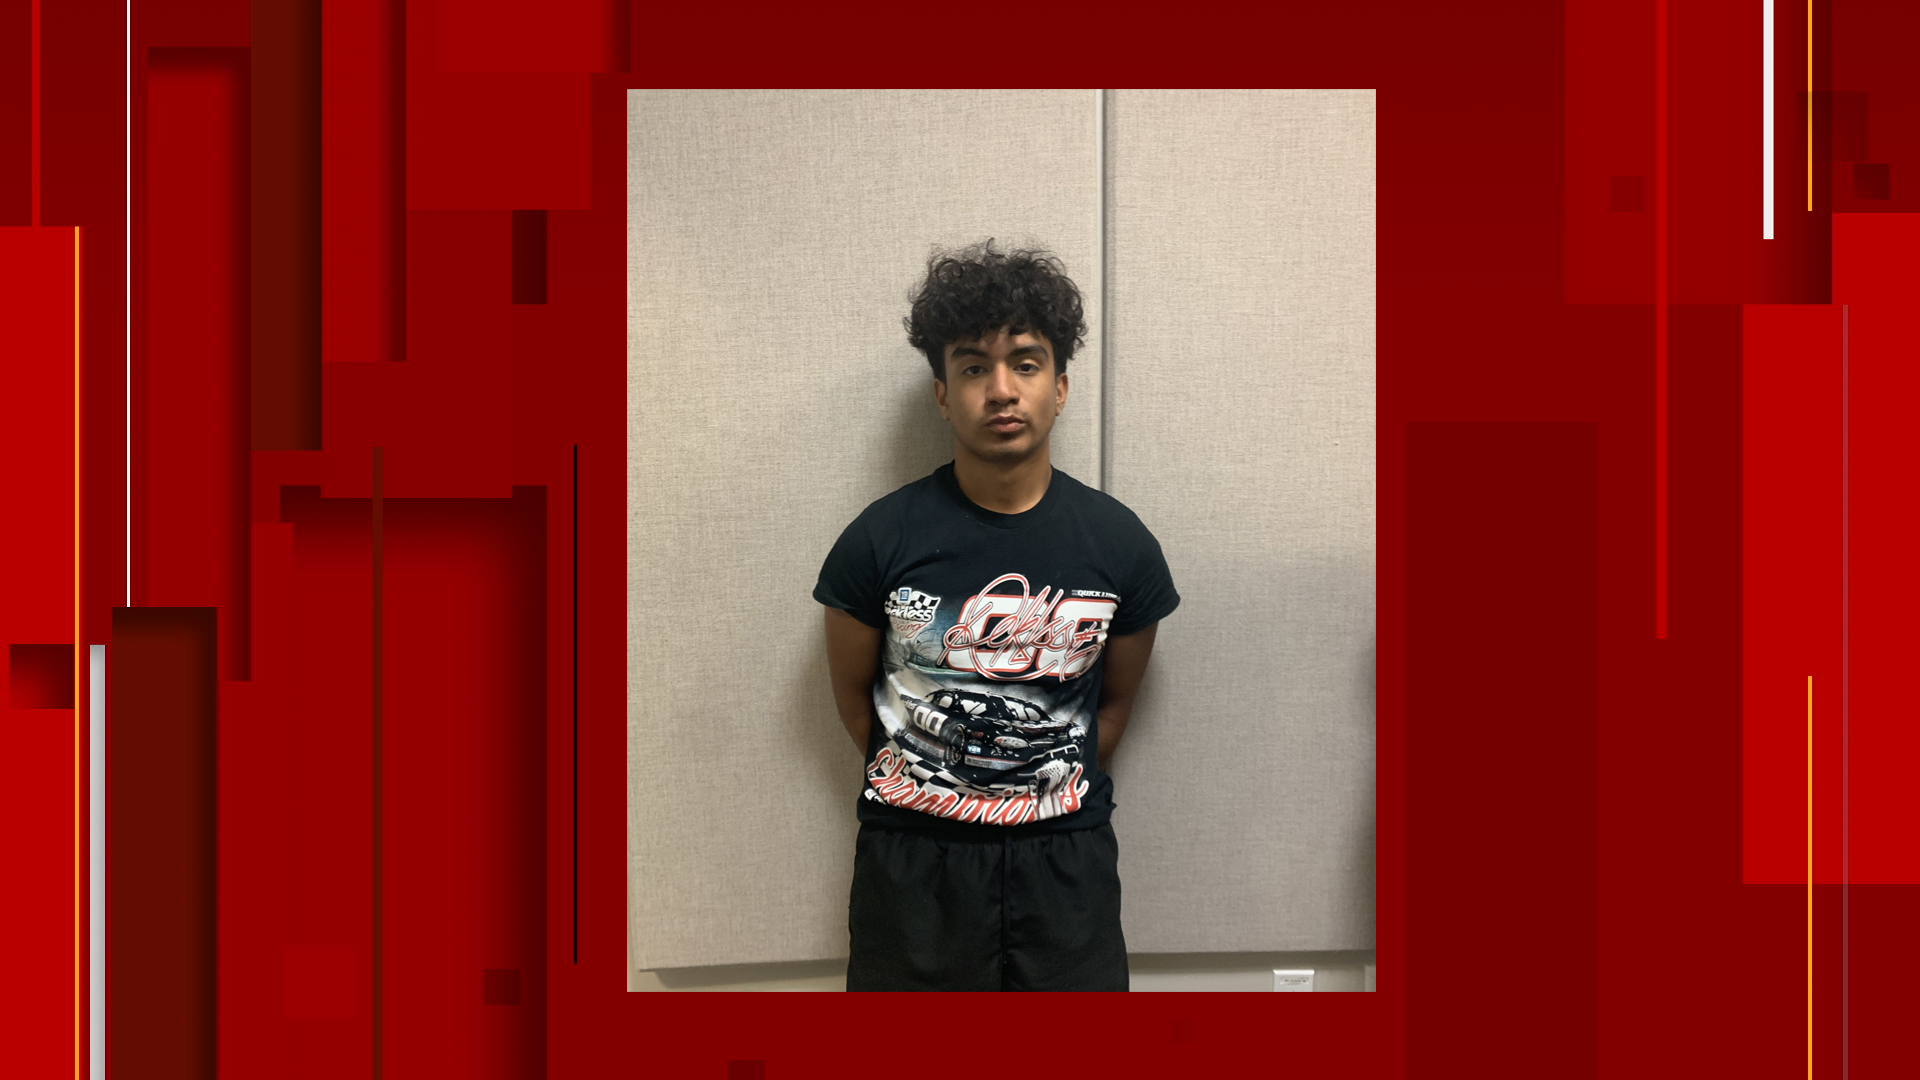 Xxx Litil Girl - Man, 18, arrested for child pornography, sex assault of a 14-year-old girl,  BCSO says